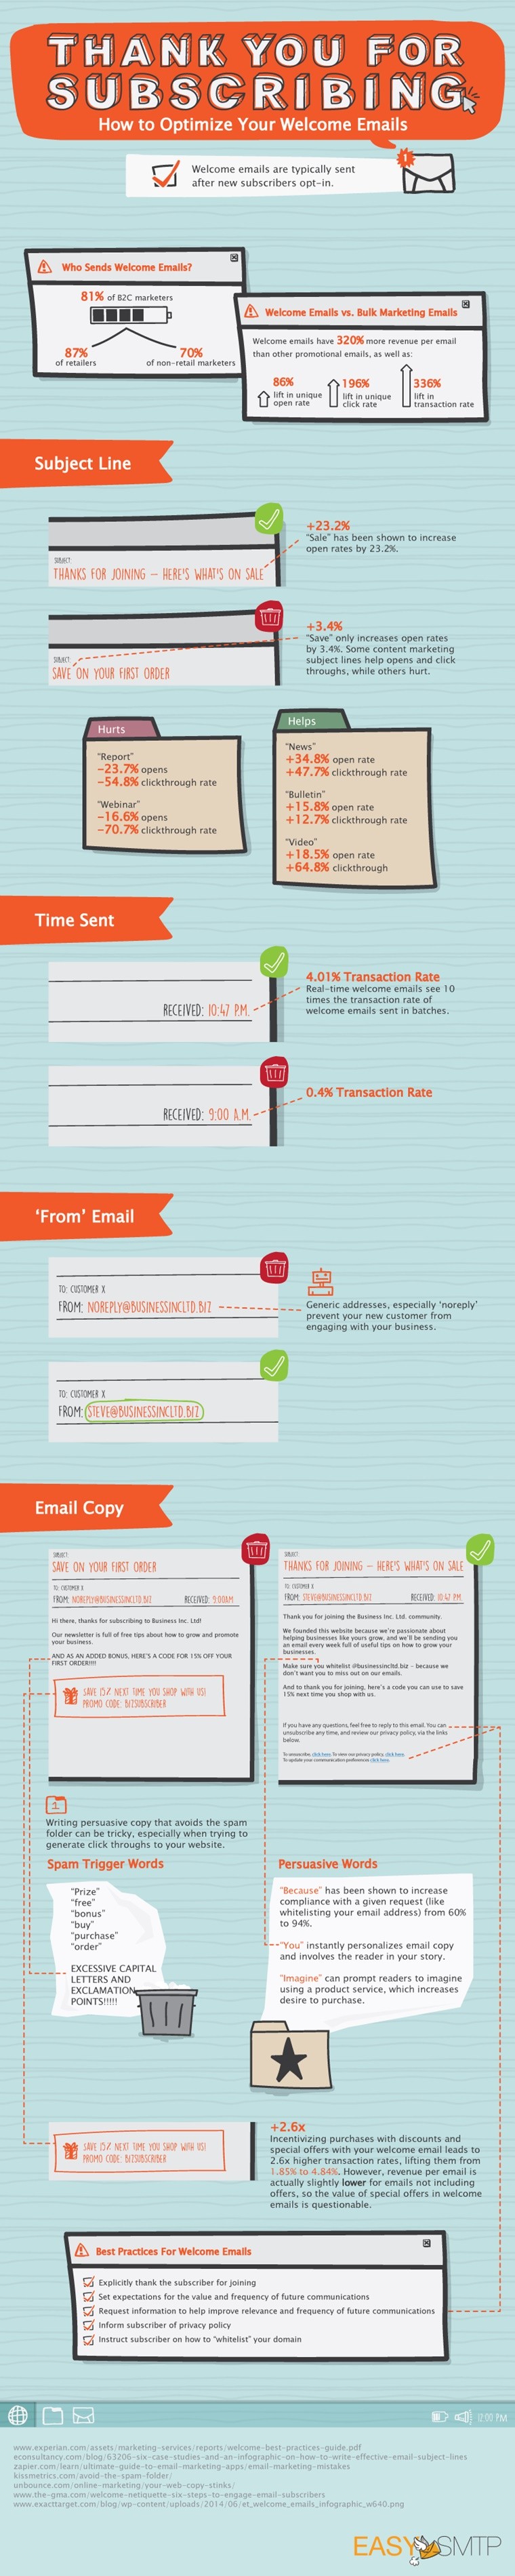 How to Optimize Your Welcome Emails